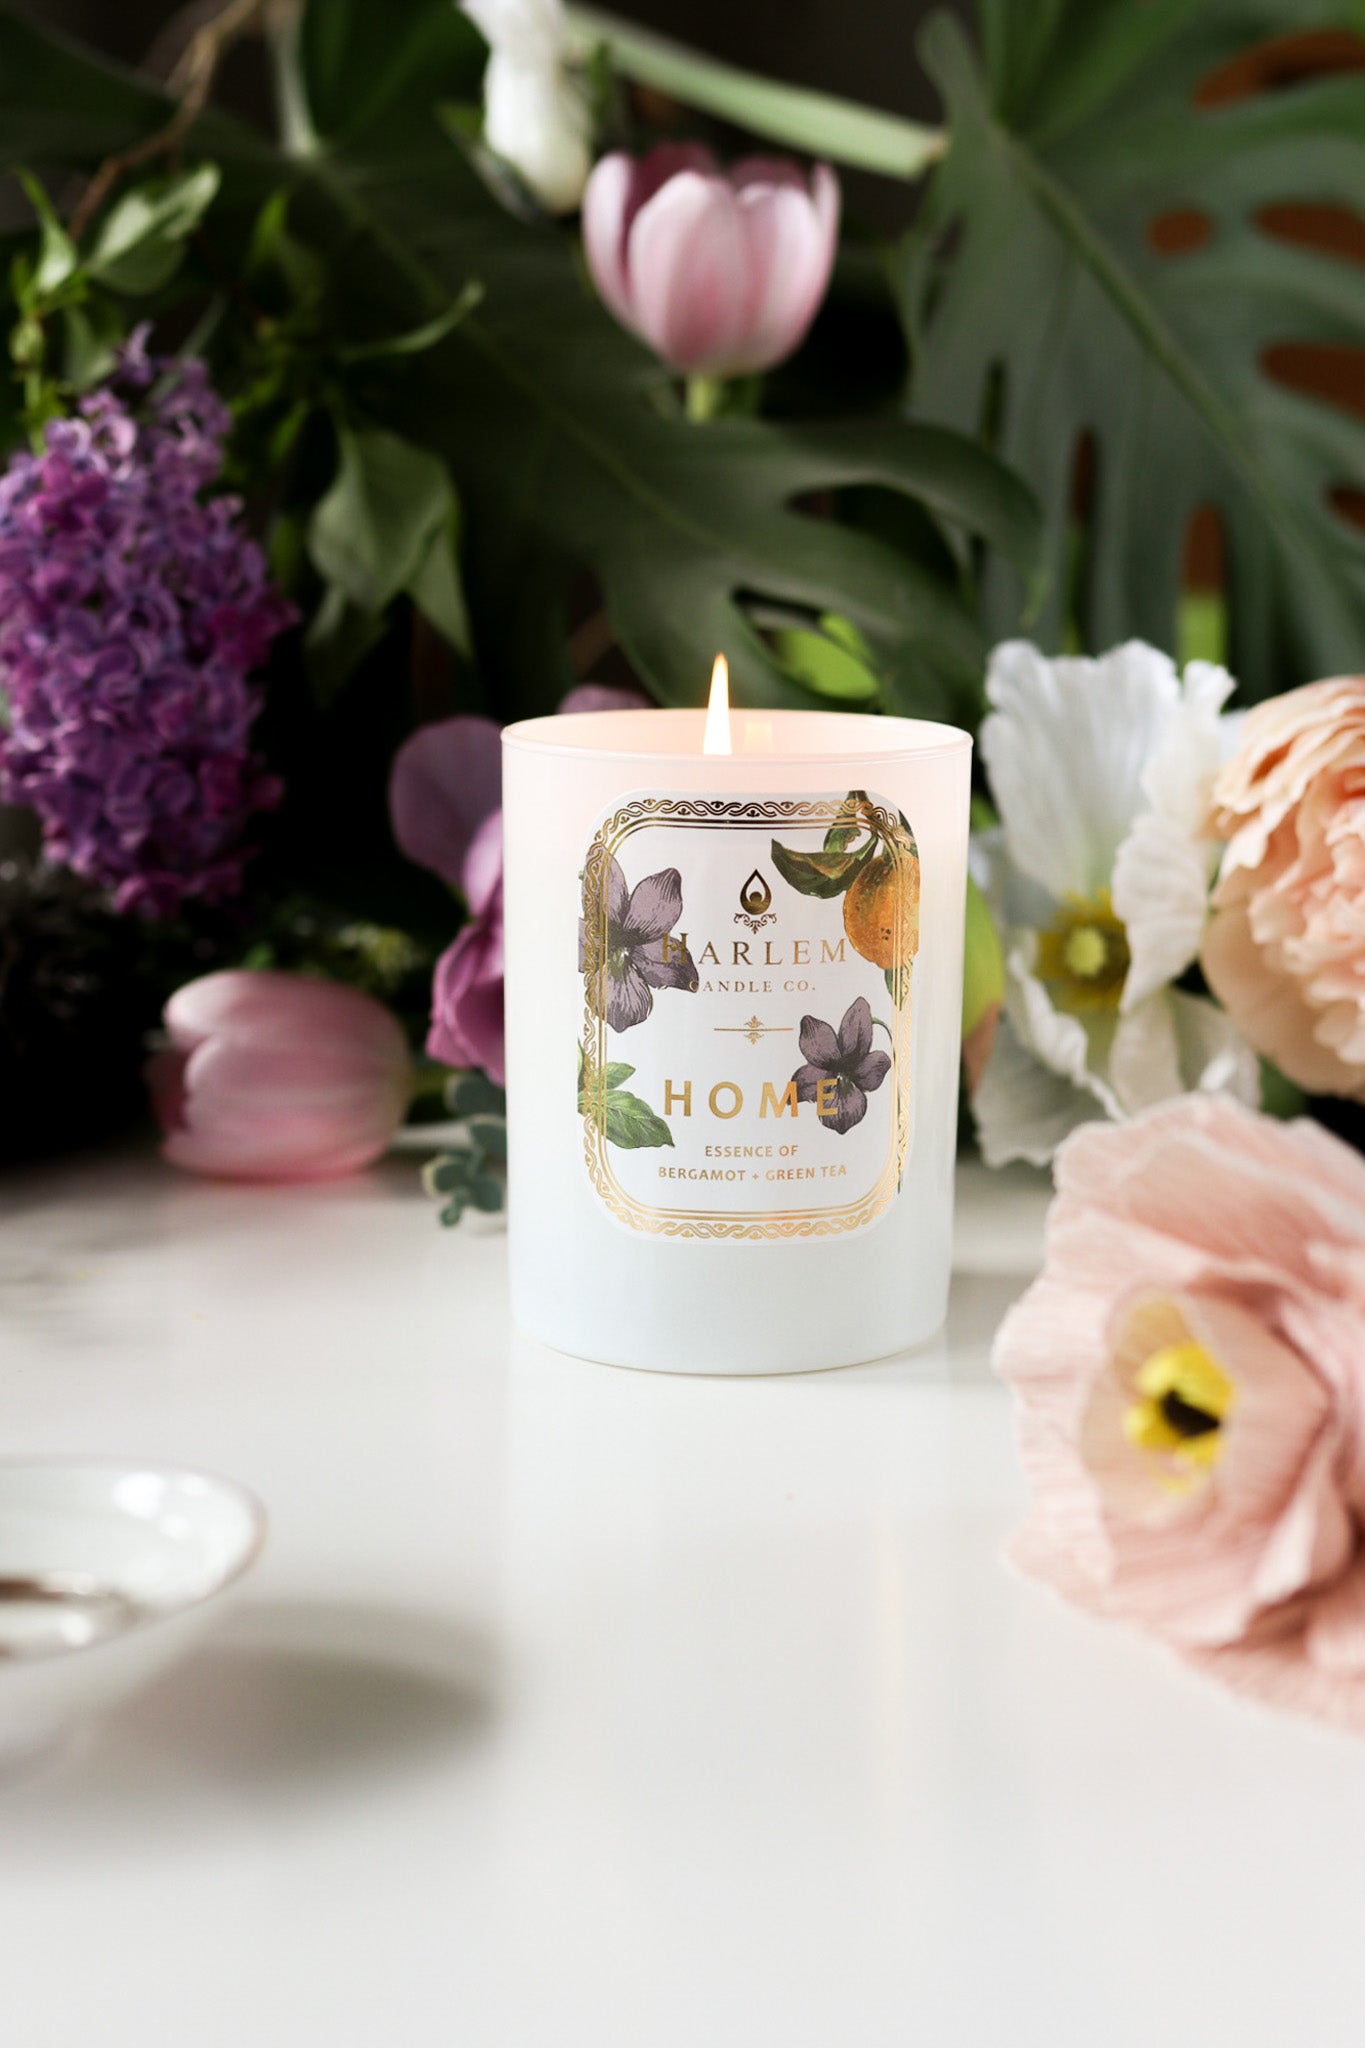 This is a vertical lifestyle image of the "Home" Luxury Candle with colorful flowers in the background.